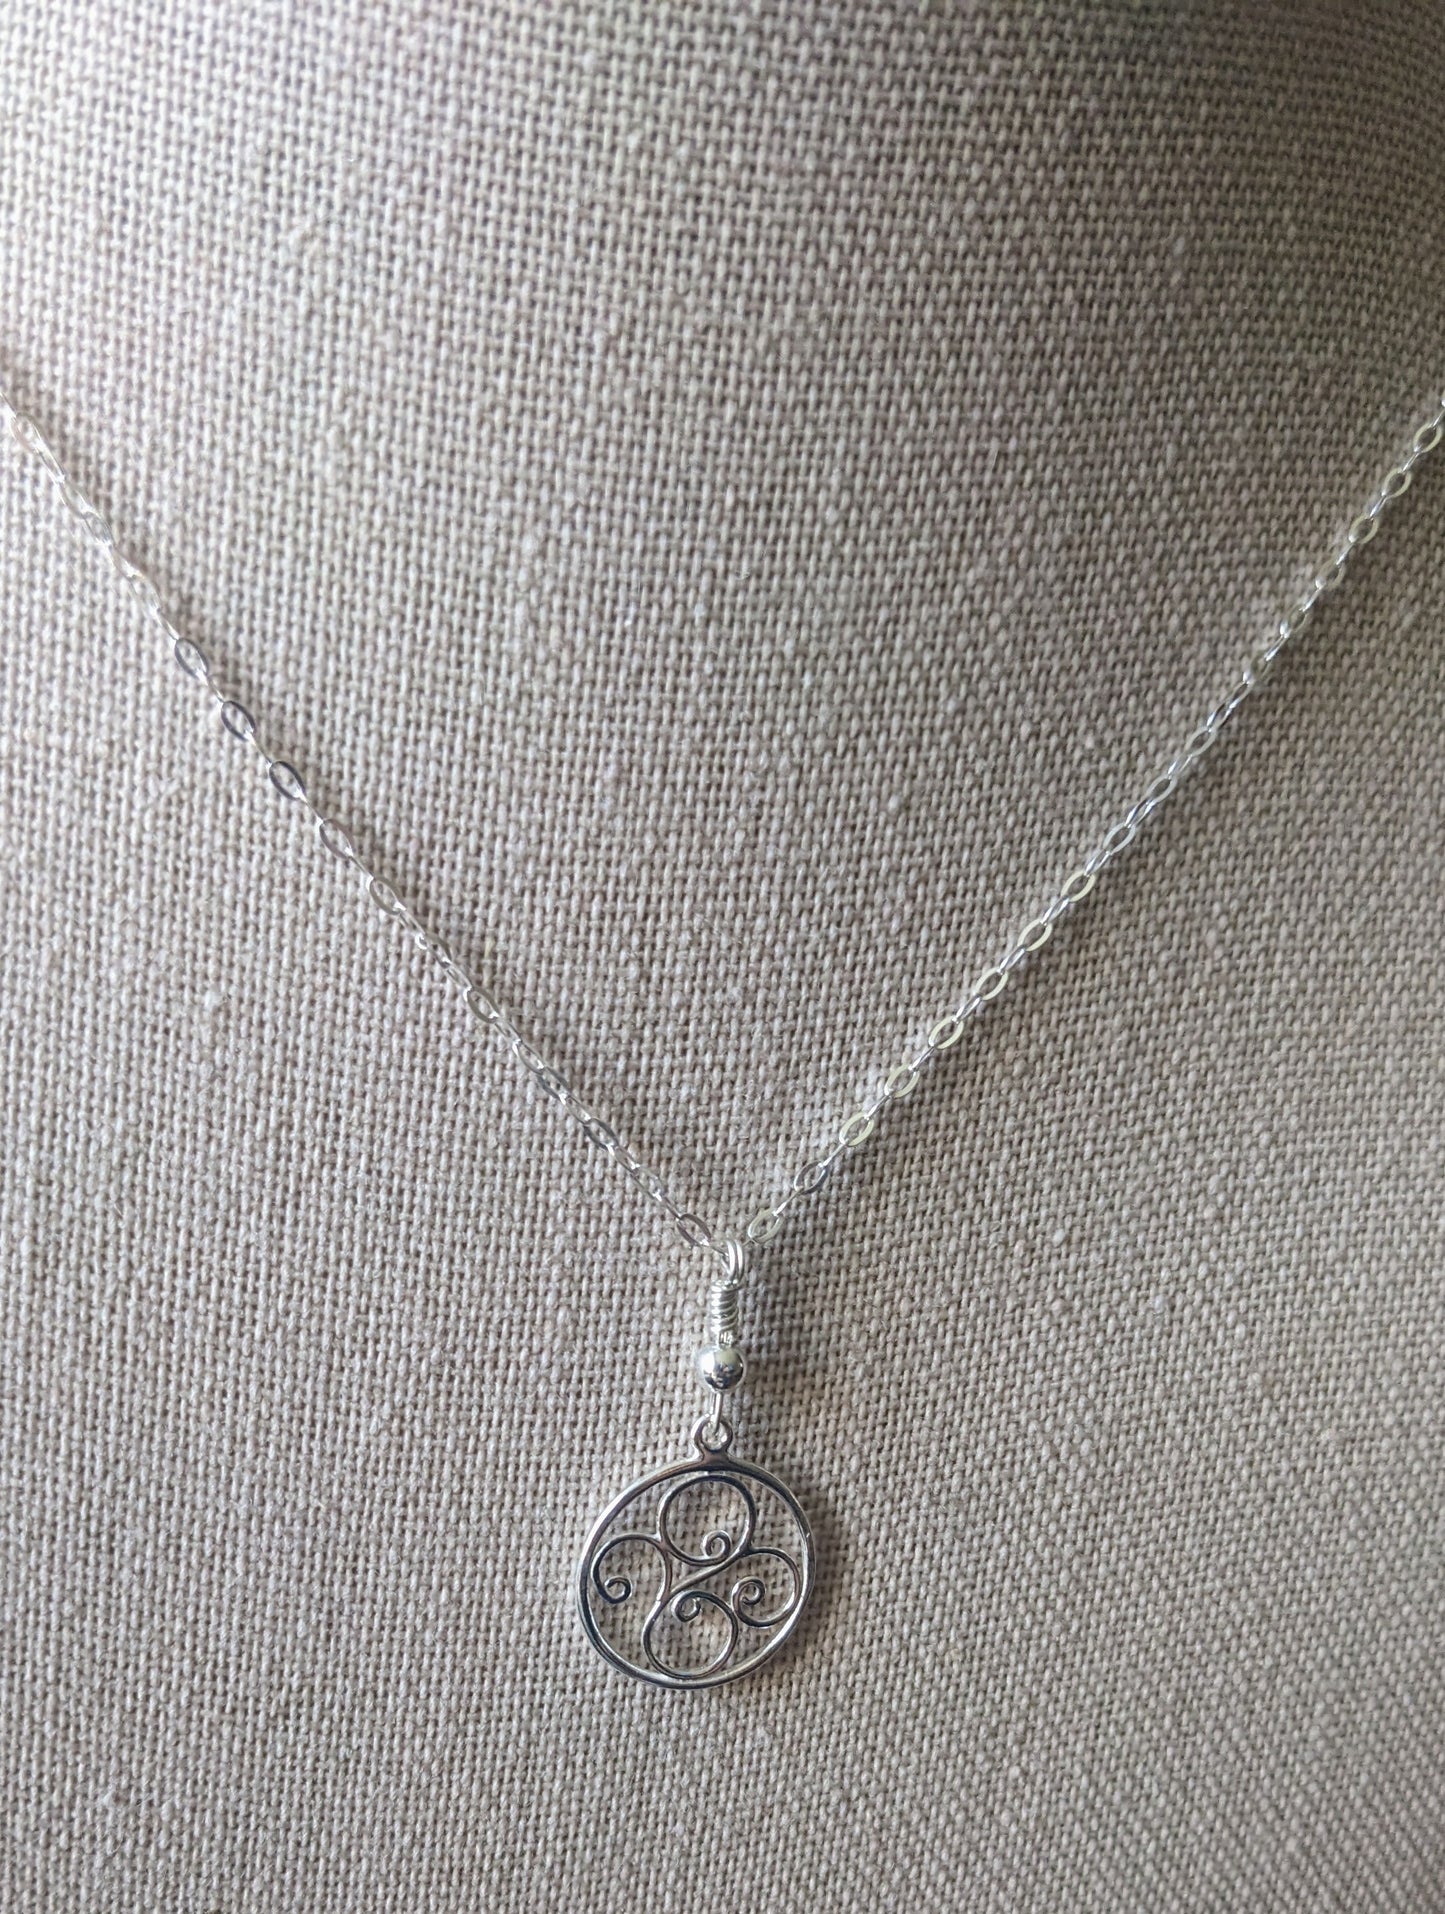 Sterling Silver Filigree Necklace